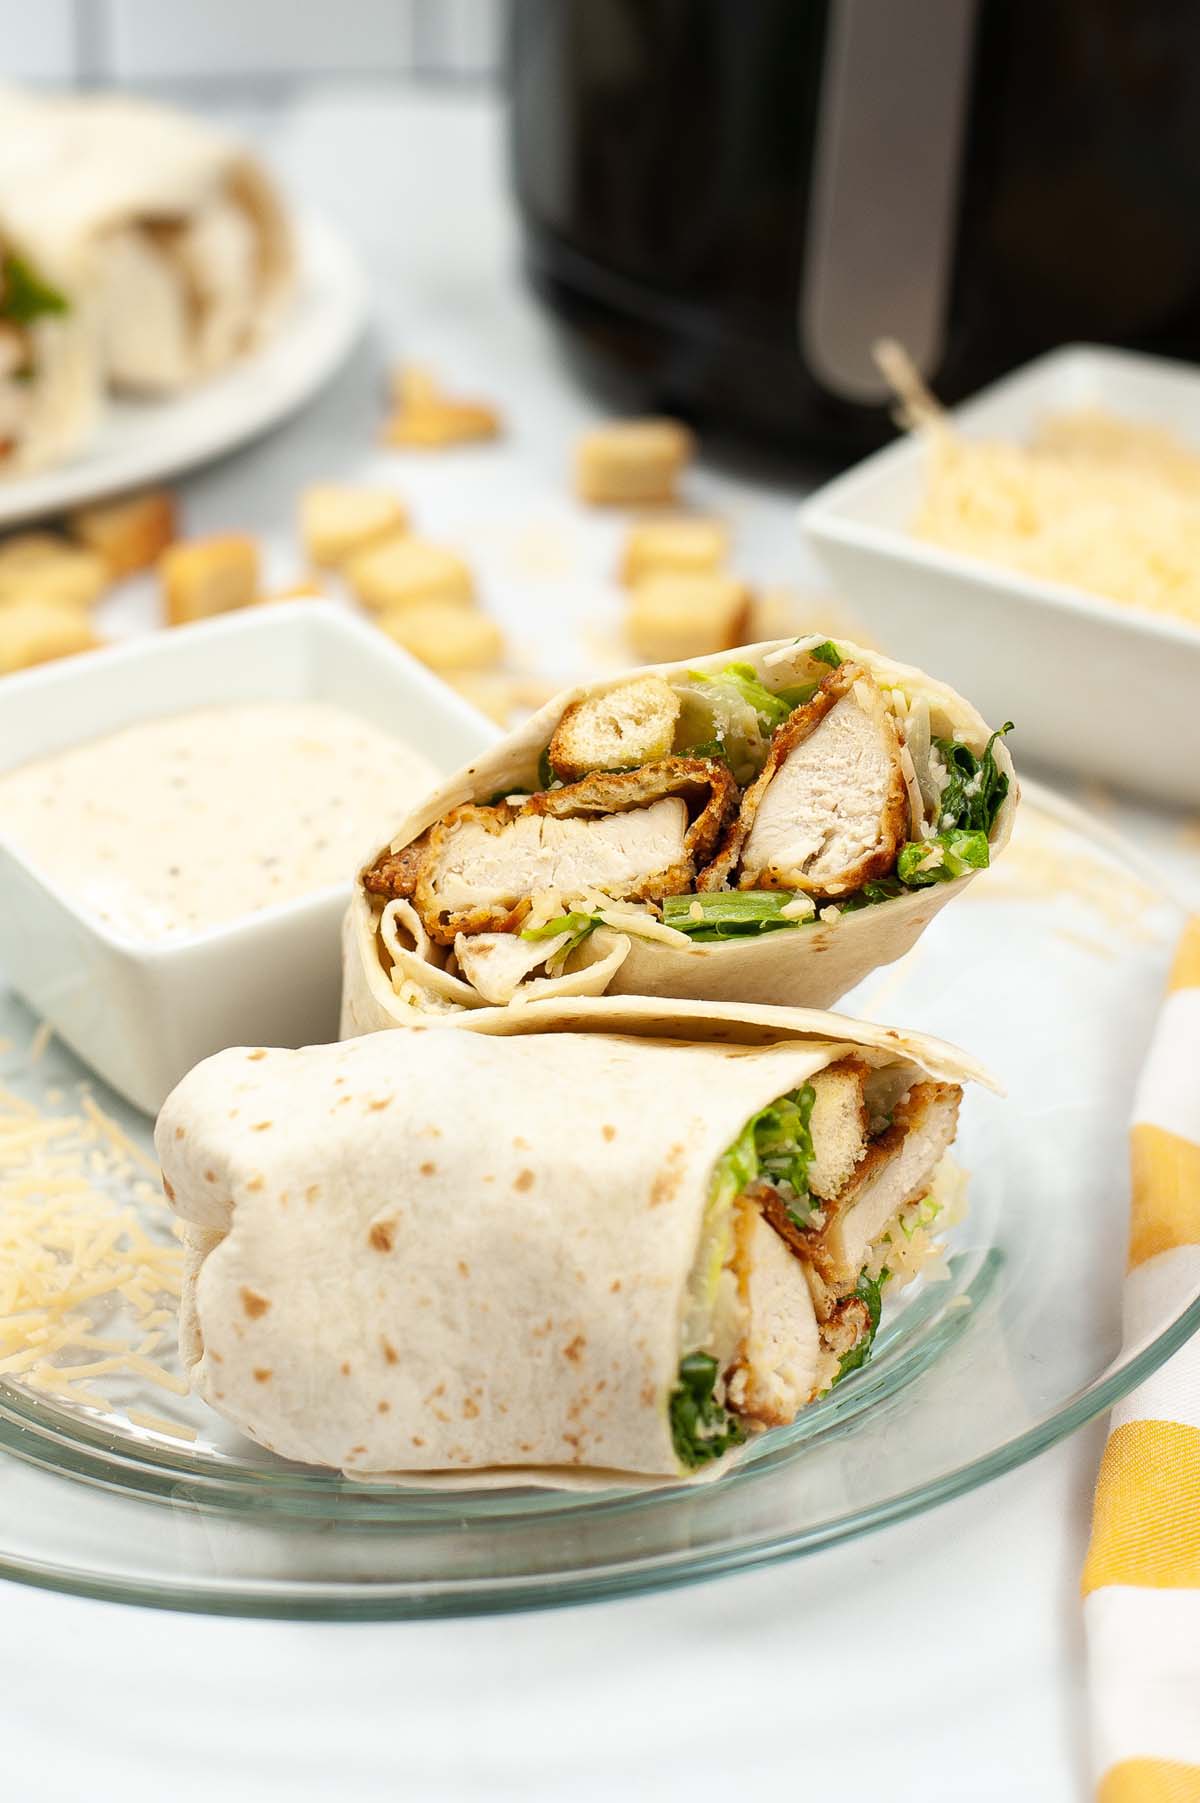 Wraps on a plate with ranch dip.